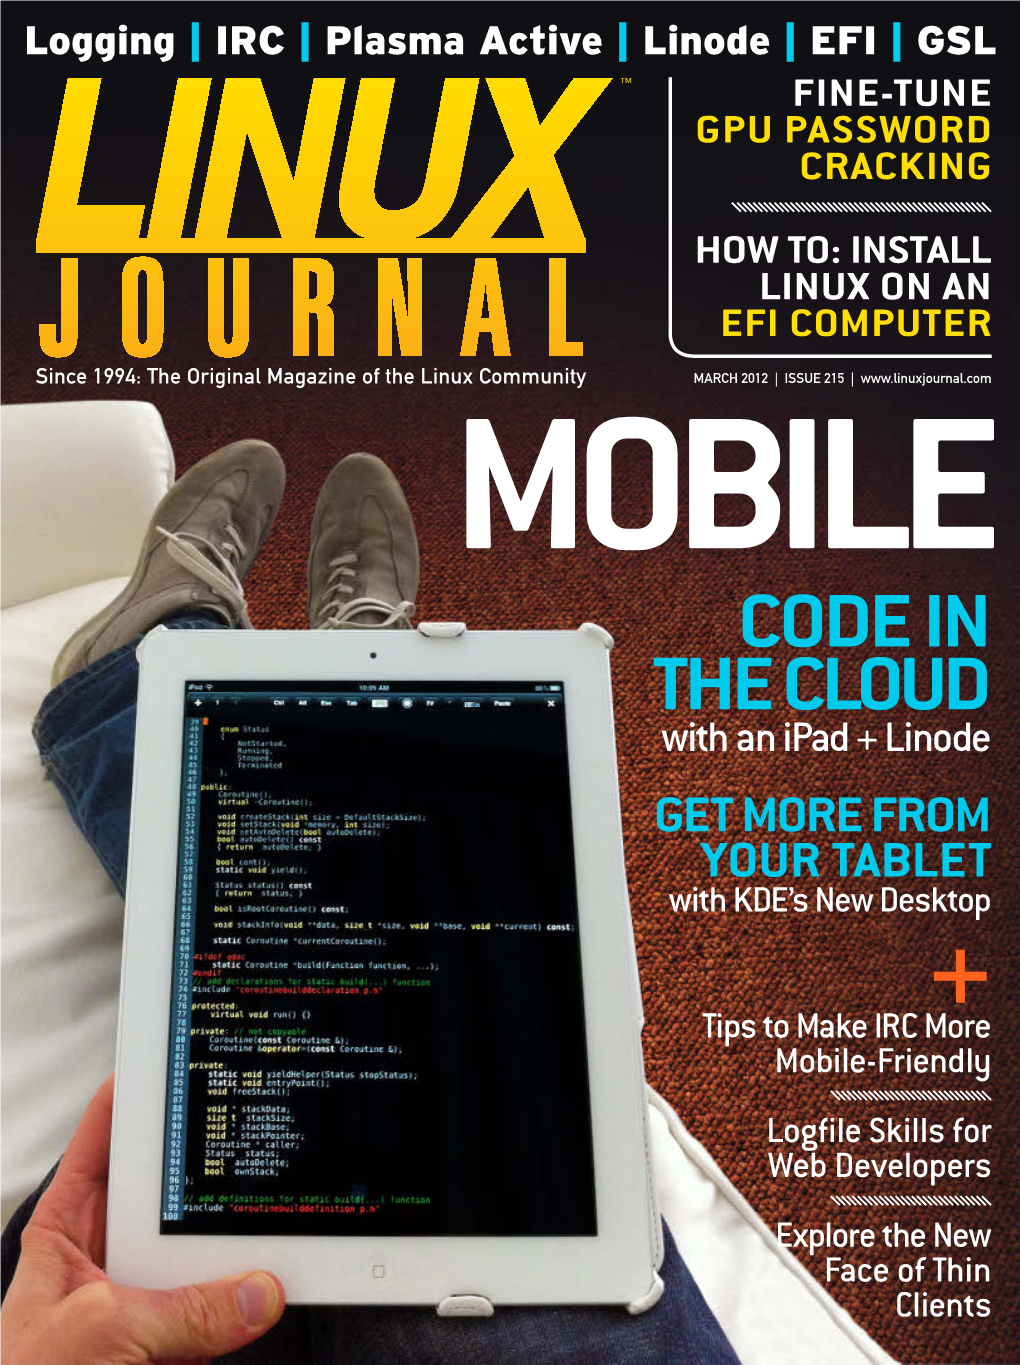 LINUX JOURNAL (ISSN 1075-3583) Is Published Monthly by Belltown Media, Inc., 2121 Sage Road, Ste